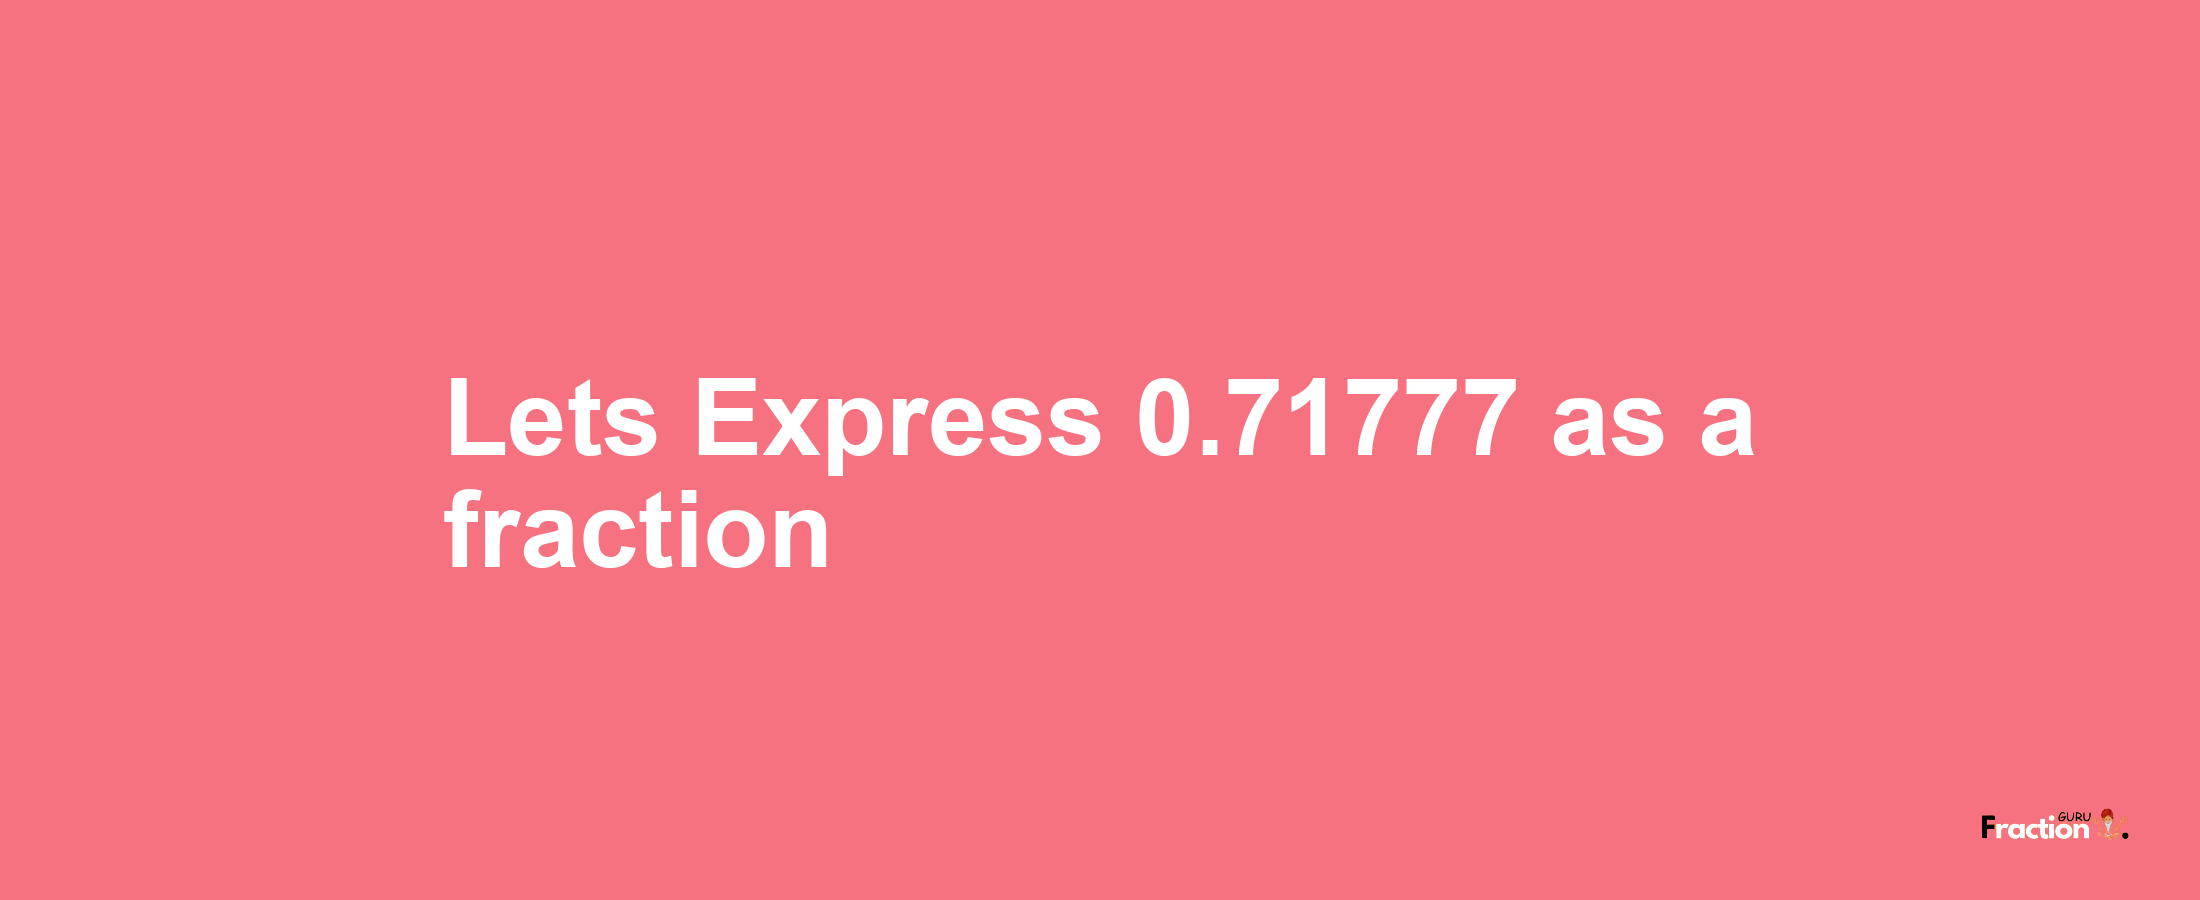 Lets Express 0.71777 as afraction